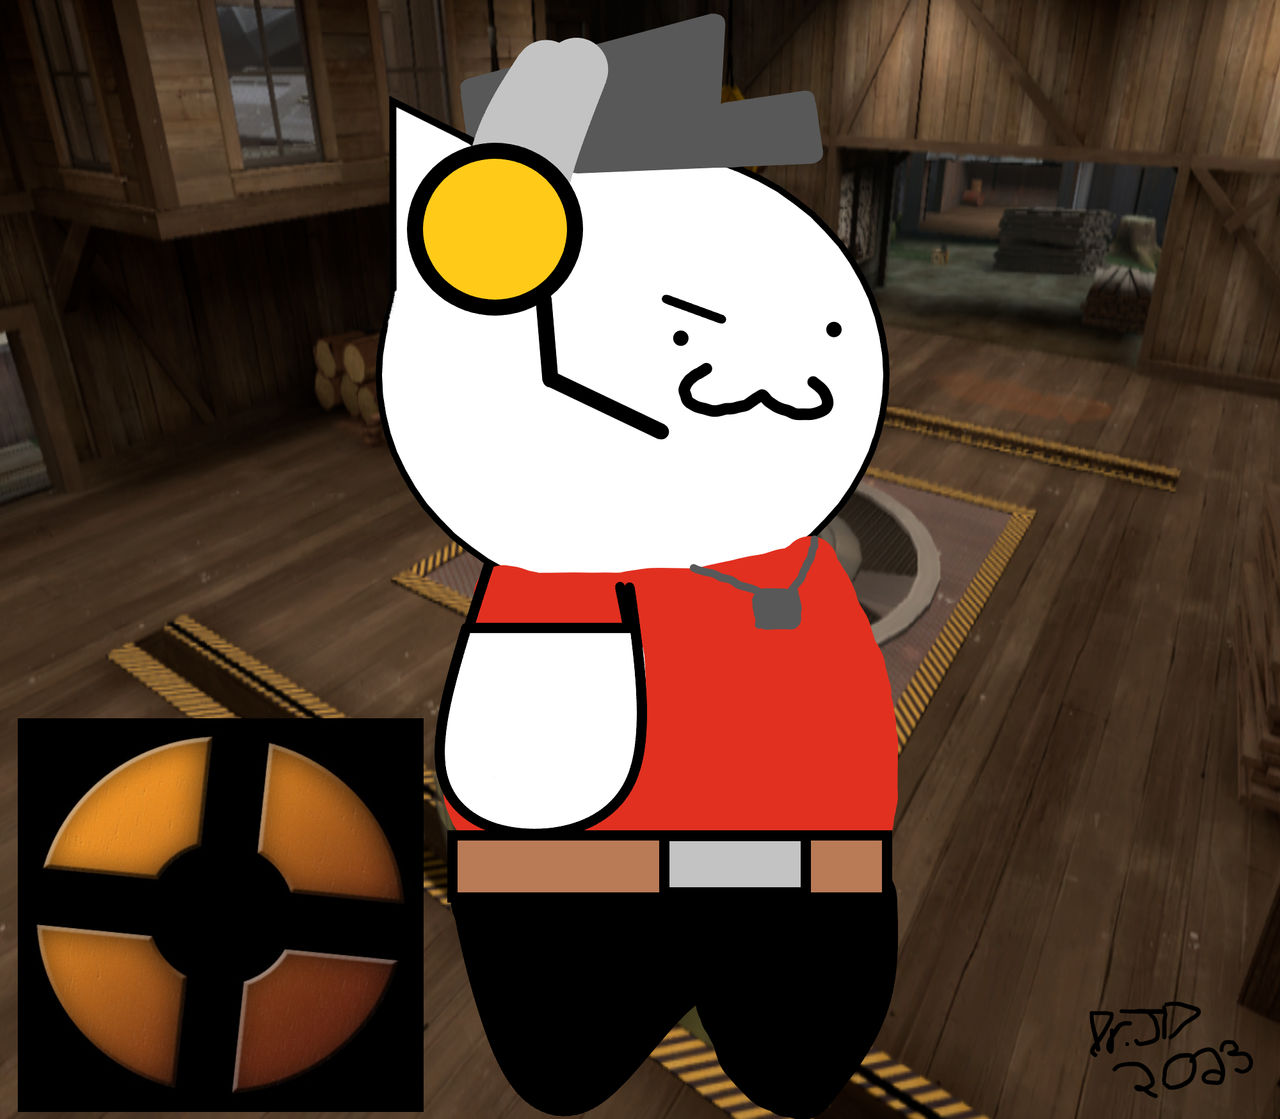 TF2 Awkward - Cat the Scout by chibijaime on DeviantArt